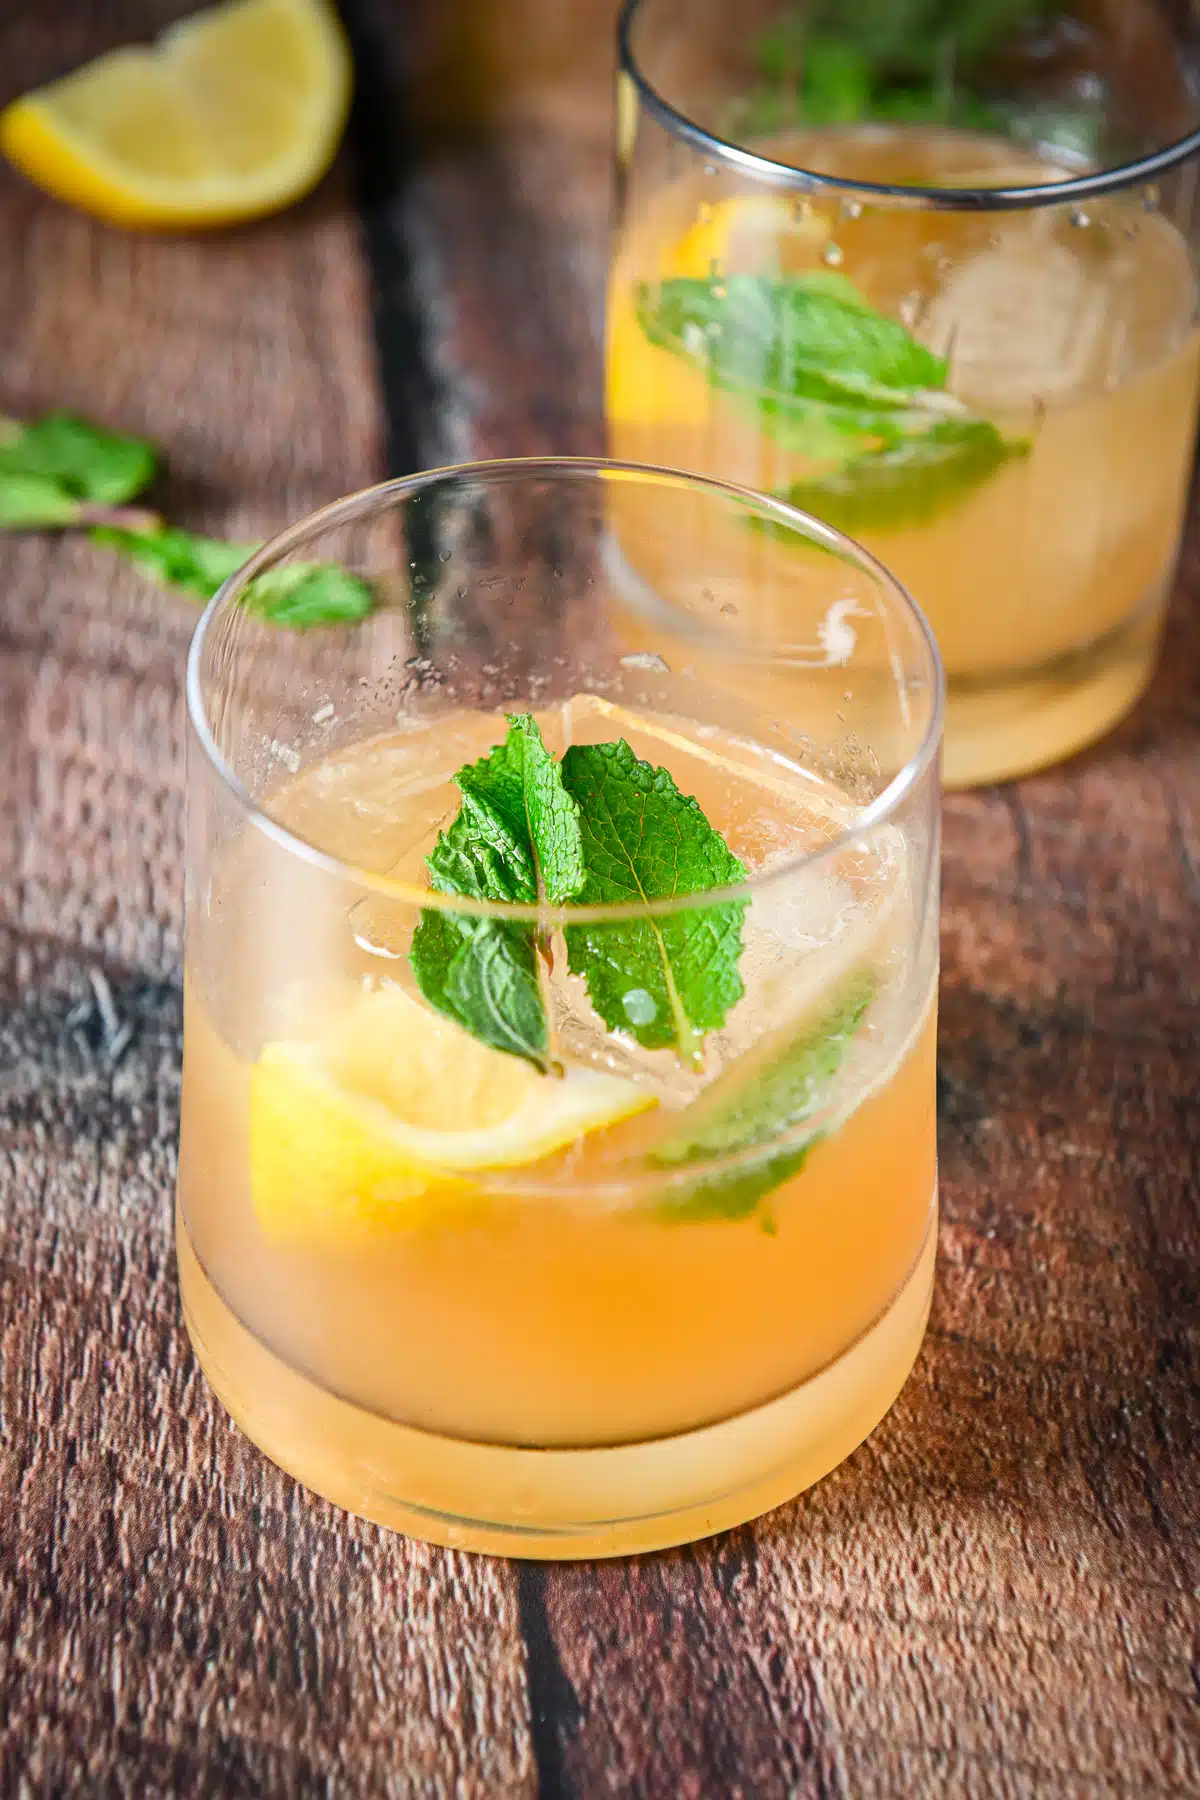 mint floating on the cocktail with whiskey and lemon